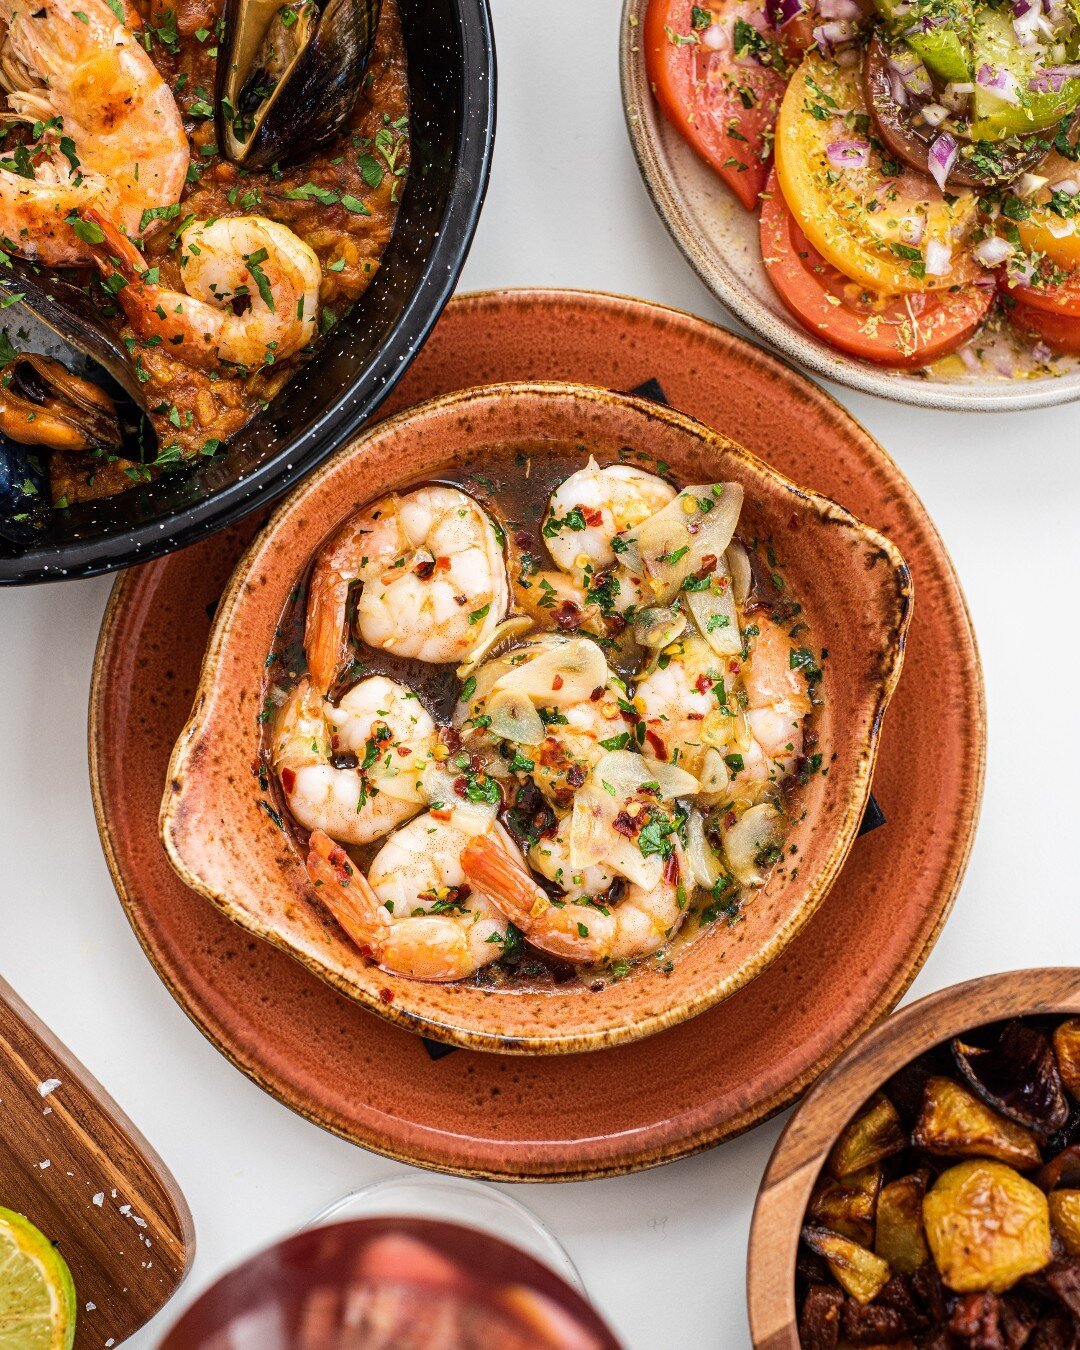 A Spanish classic, Gambas Al Ajillo. Juicy King Prawns swimming in a flavour-filled olive oil, garlic and chilli sauce. You'll find the delicious aroma wafting along the South Bank.

📸 @rebeccadickson_photography